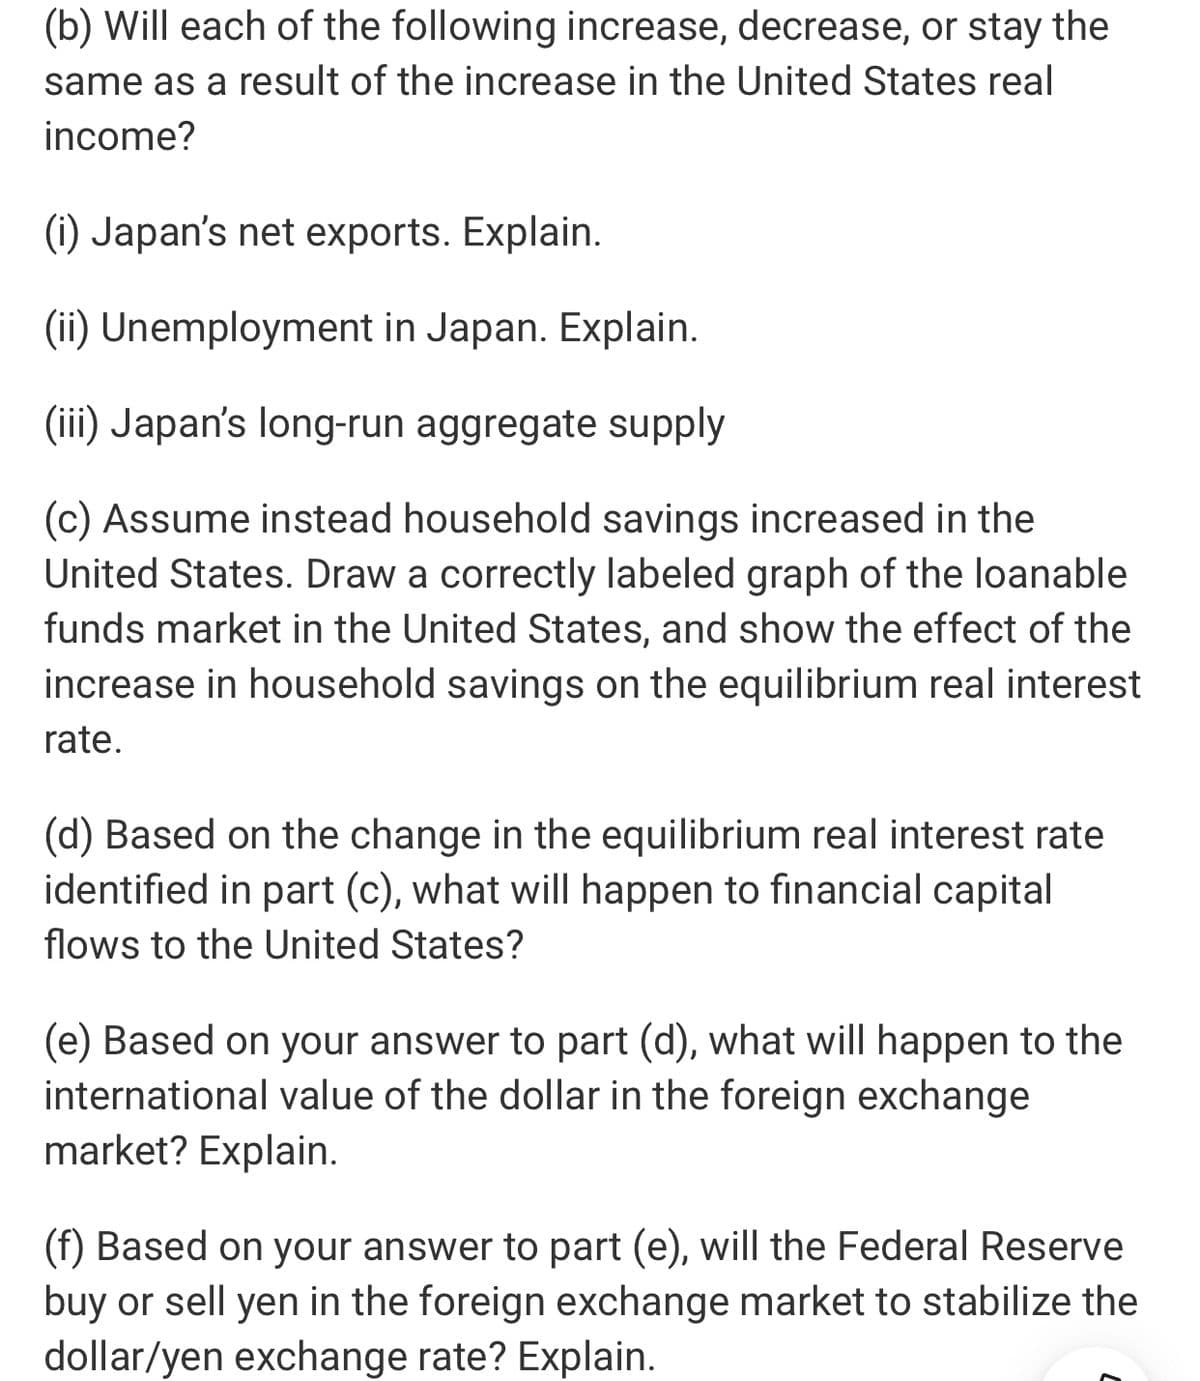 (b) Will each of the following increase, decrease, or stay the
same as a result of the increase in the United States real
income?
(i) Japan's net exports. Explain.
(ii) Unemployment in Japan. Explain.
(iii) Japan's long-run aggregate supply
(c) Assume instead household savings increased in the
United States. Draw a correctly labeled graph of the loanable
funds market in the United States, and show the effect of the
increase in household savings on the equilibrium real interest
rate.
(d) Based on the change in the equilibrium real interest rate
identified in part (c), what will happen to financial capital
flows to the United States?
(e) Based on your answer to part (d), what will happen to the
international value of the dollar in the foreign exchange
market? Explain.
(f) Based on your answer to part (e), will the Federal Reserve
buy or sell yen in the foreign exchange market to stabilize the
dollar/yen exchange rate? Explain.
